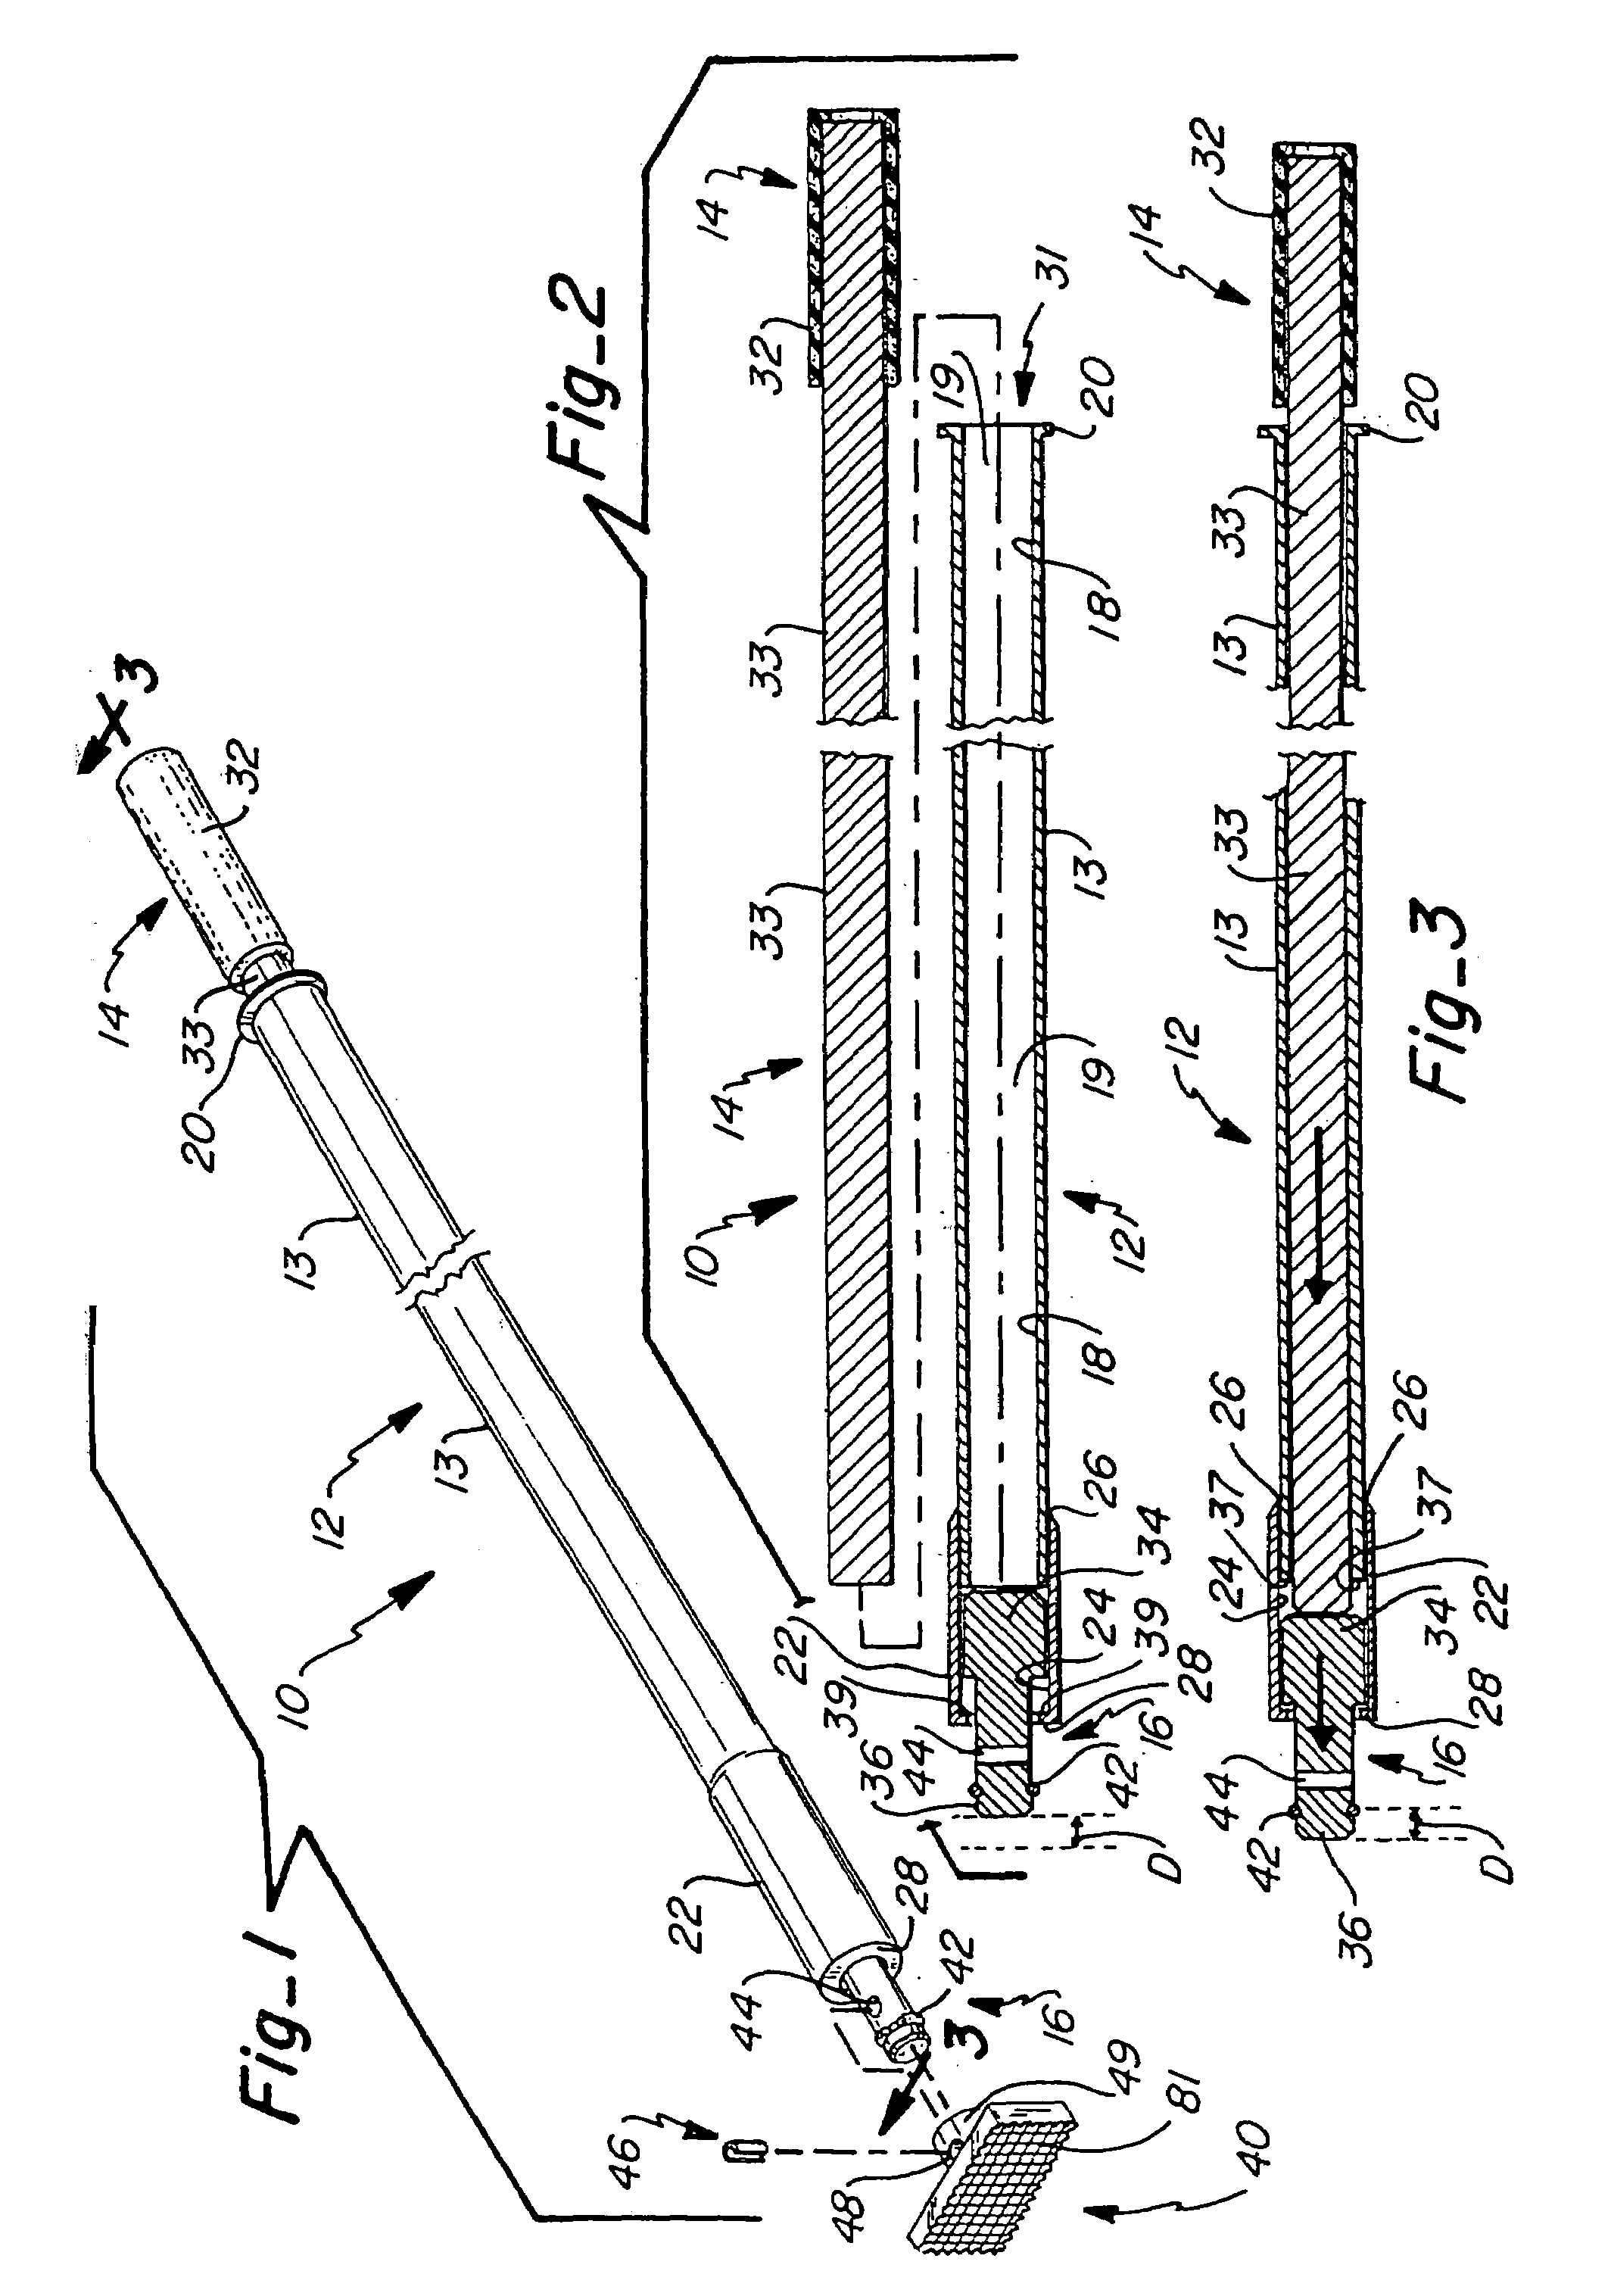 Device and method for transferring force to a targeted objected